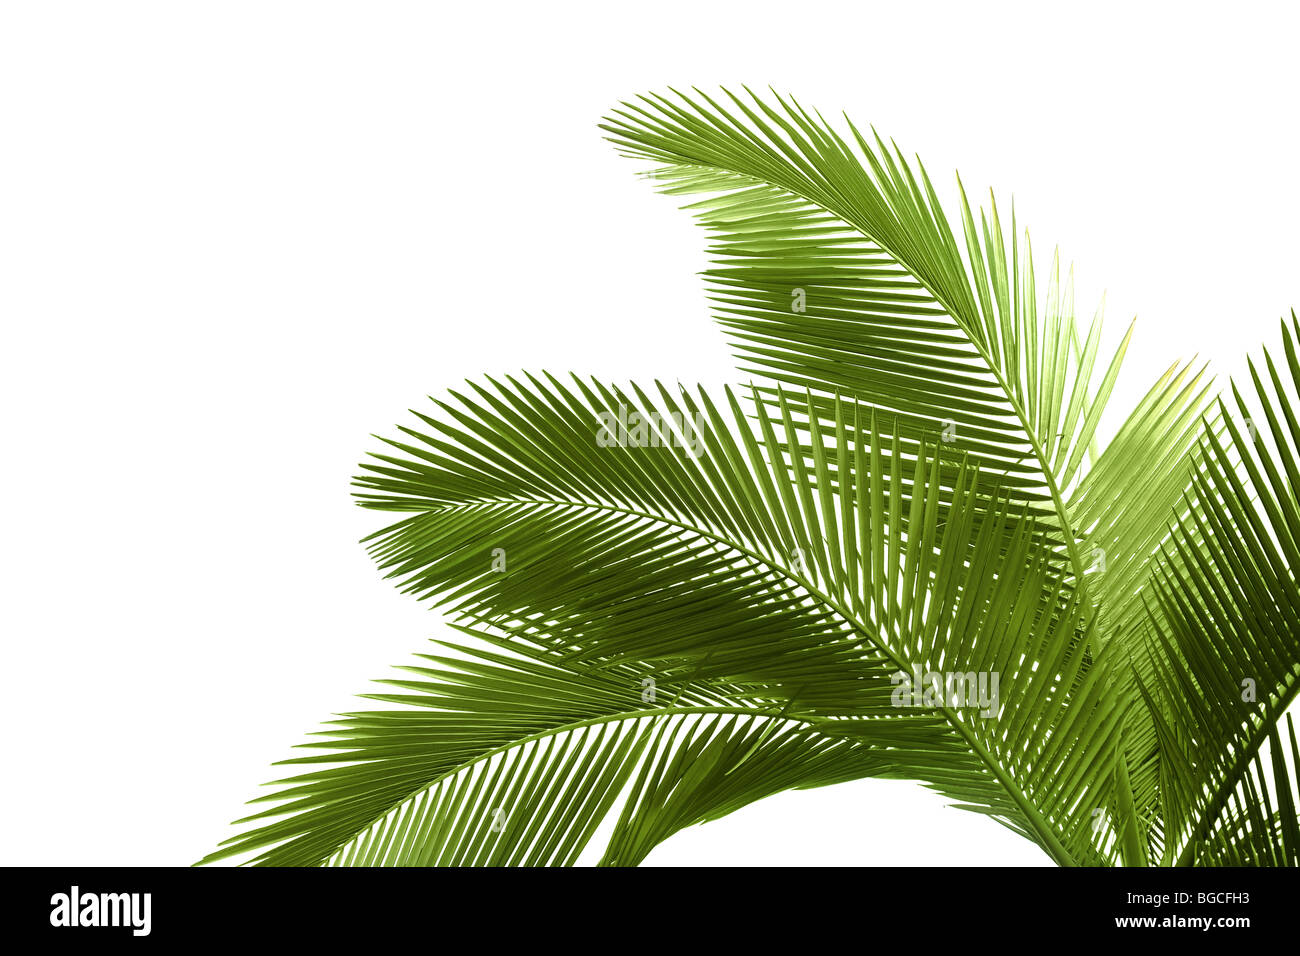 Leaves of palm tree isolated on white background Stock Photo